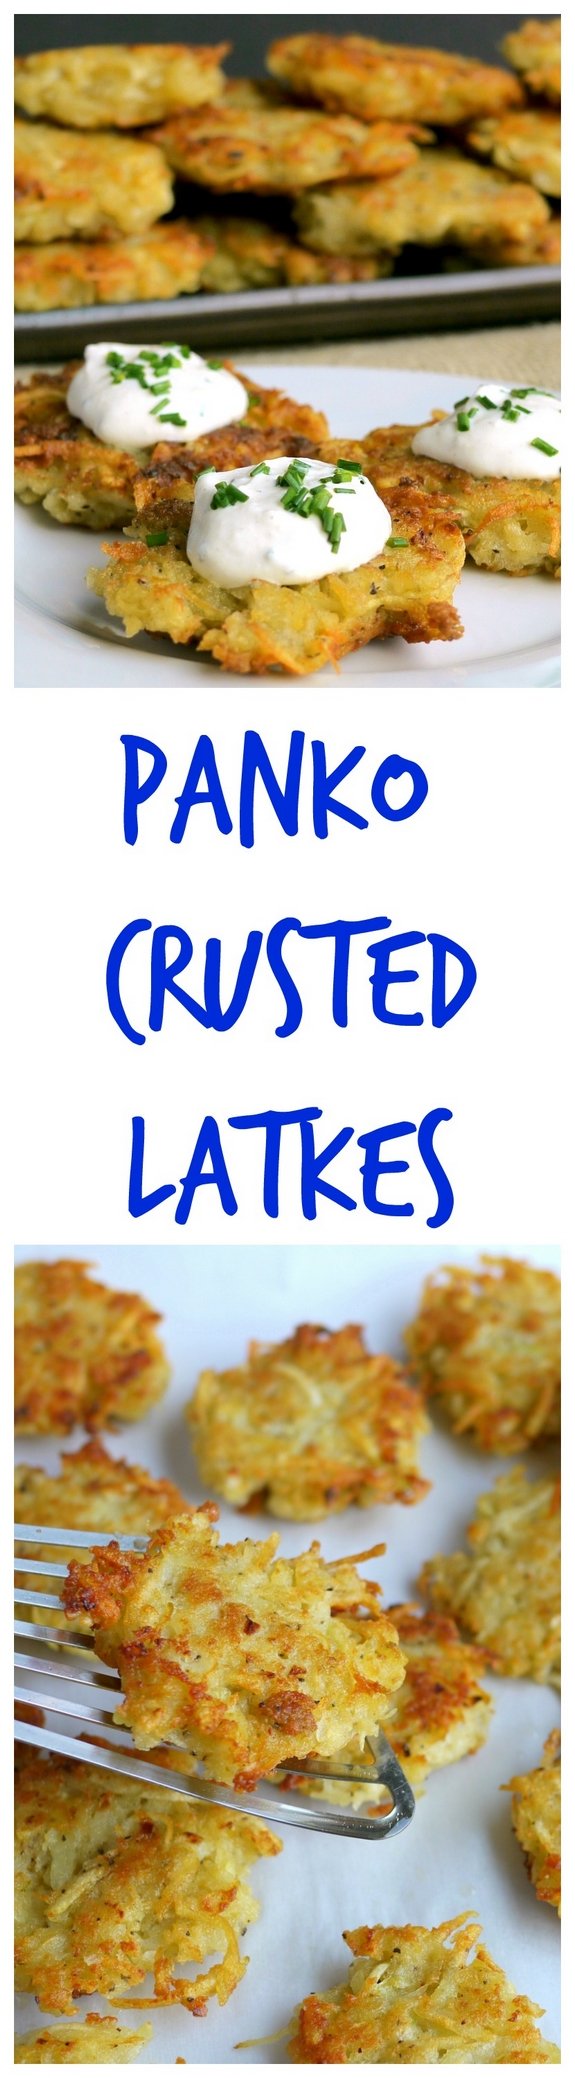 Panko Crusted Latkes your holiday celebration will be perfection with this crispy version 